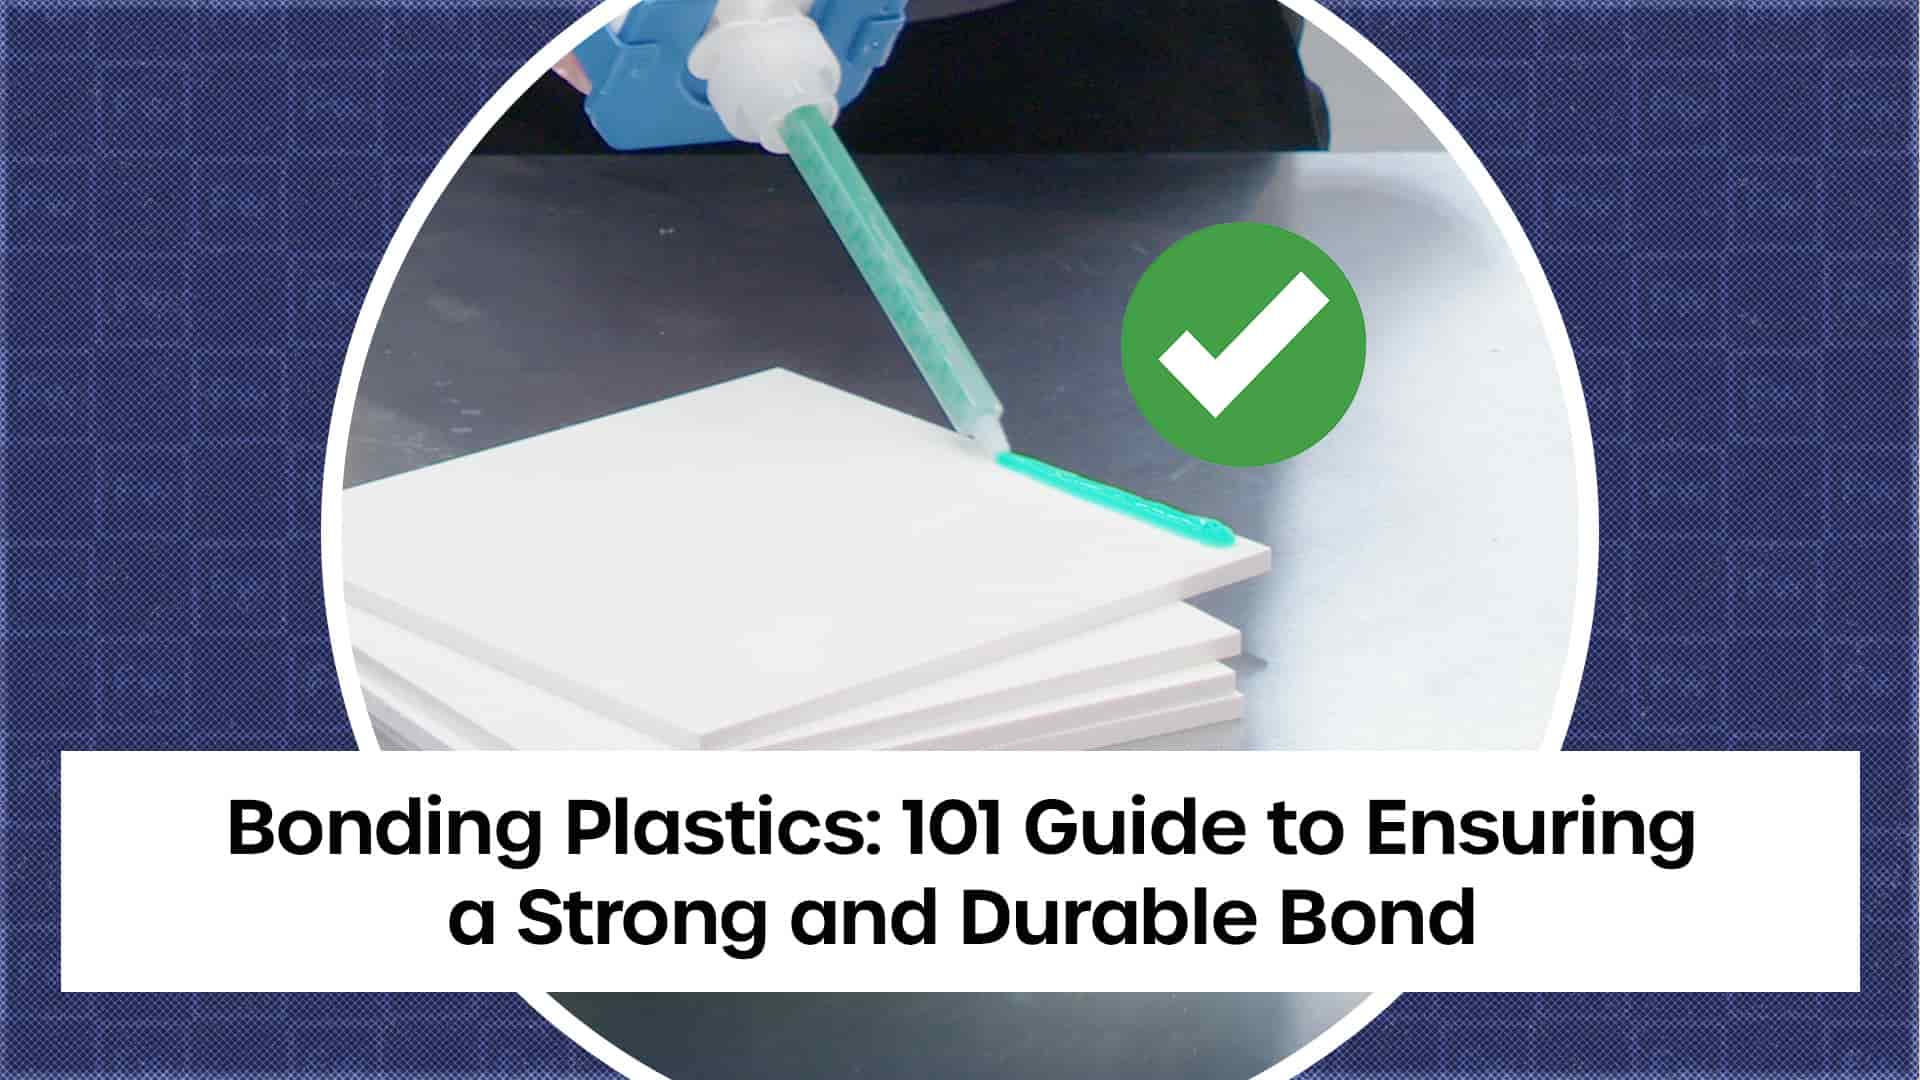 What you need to know when bonding plastics